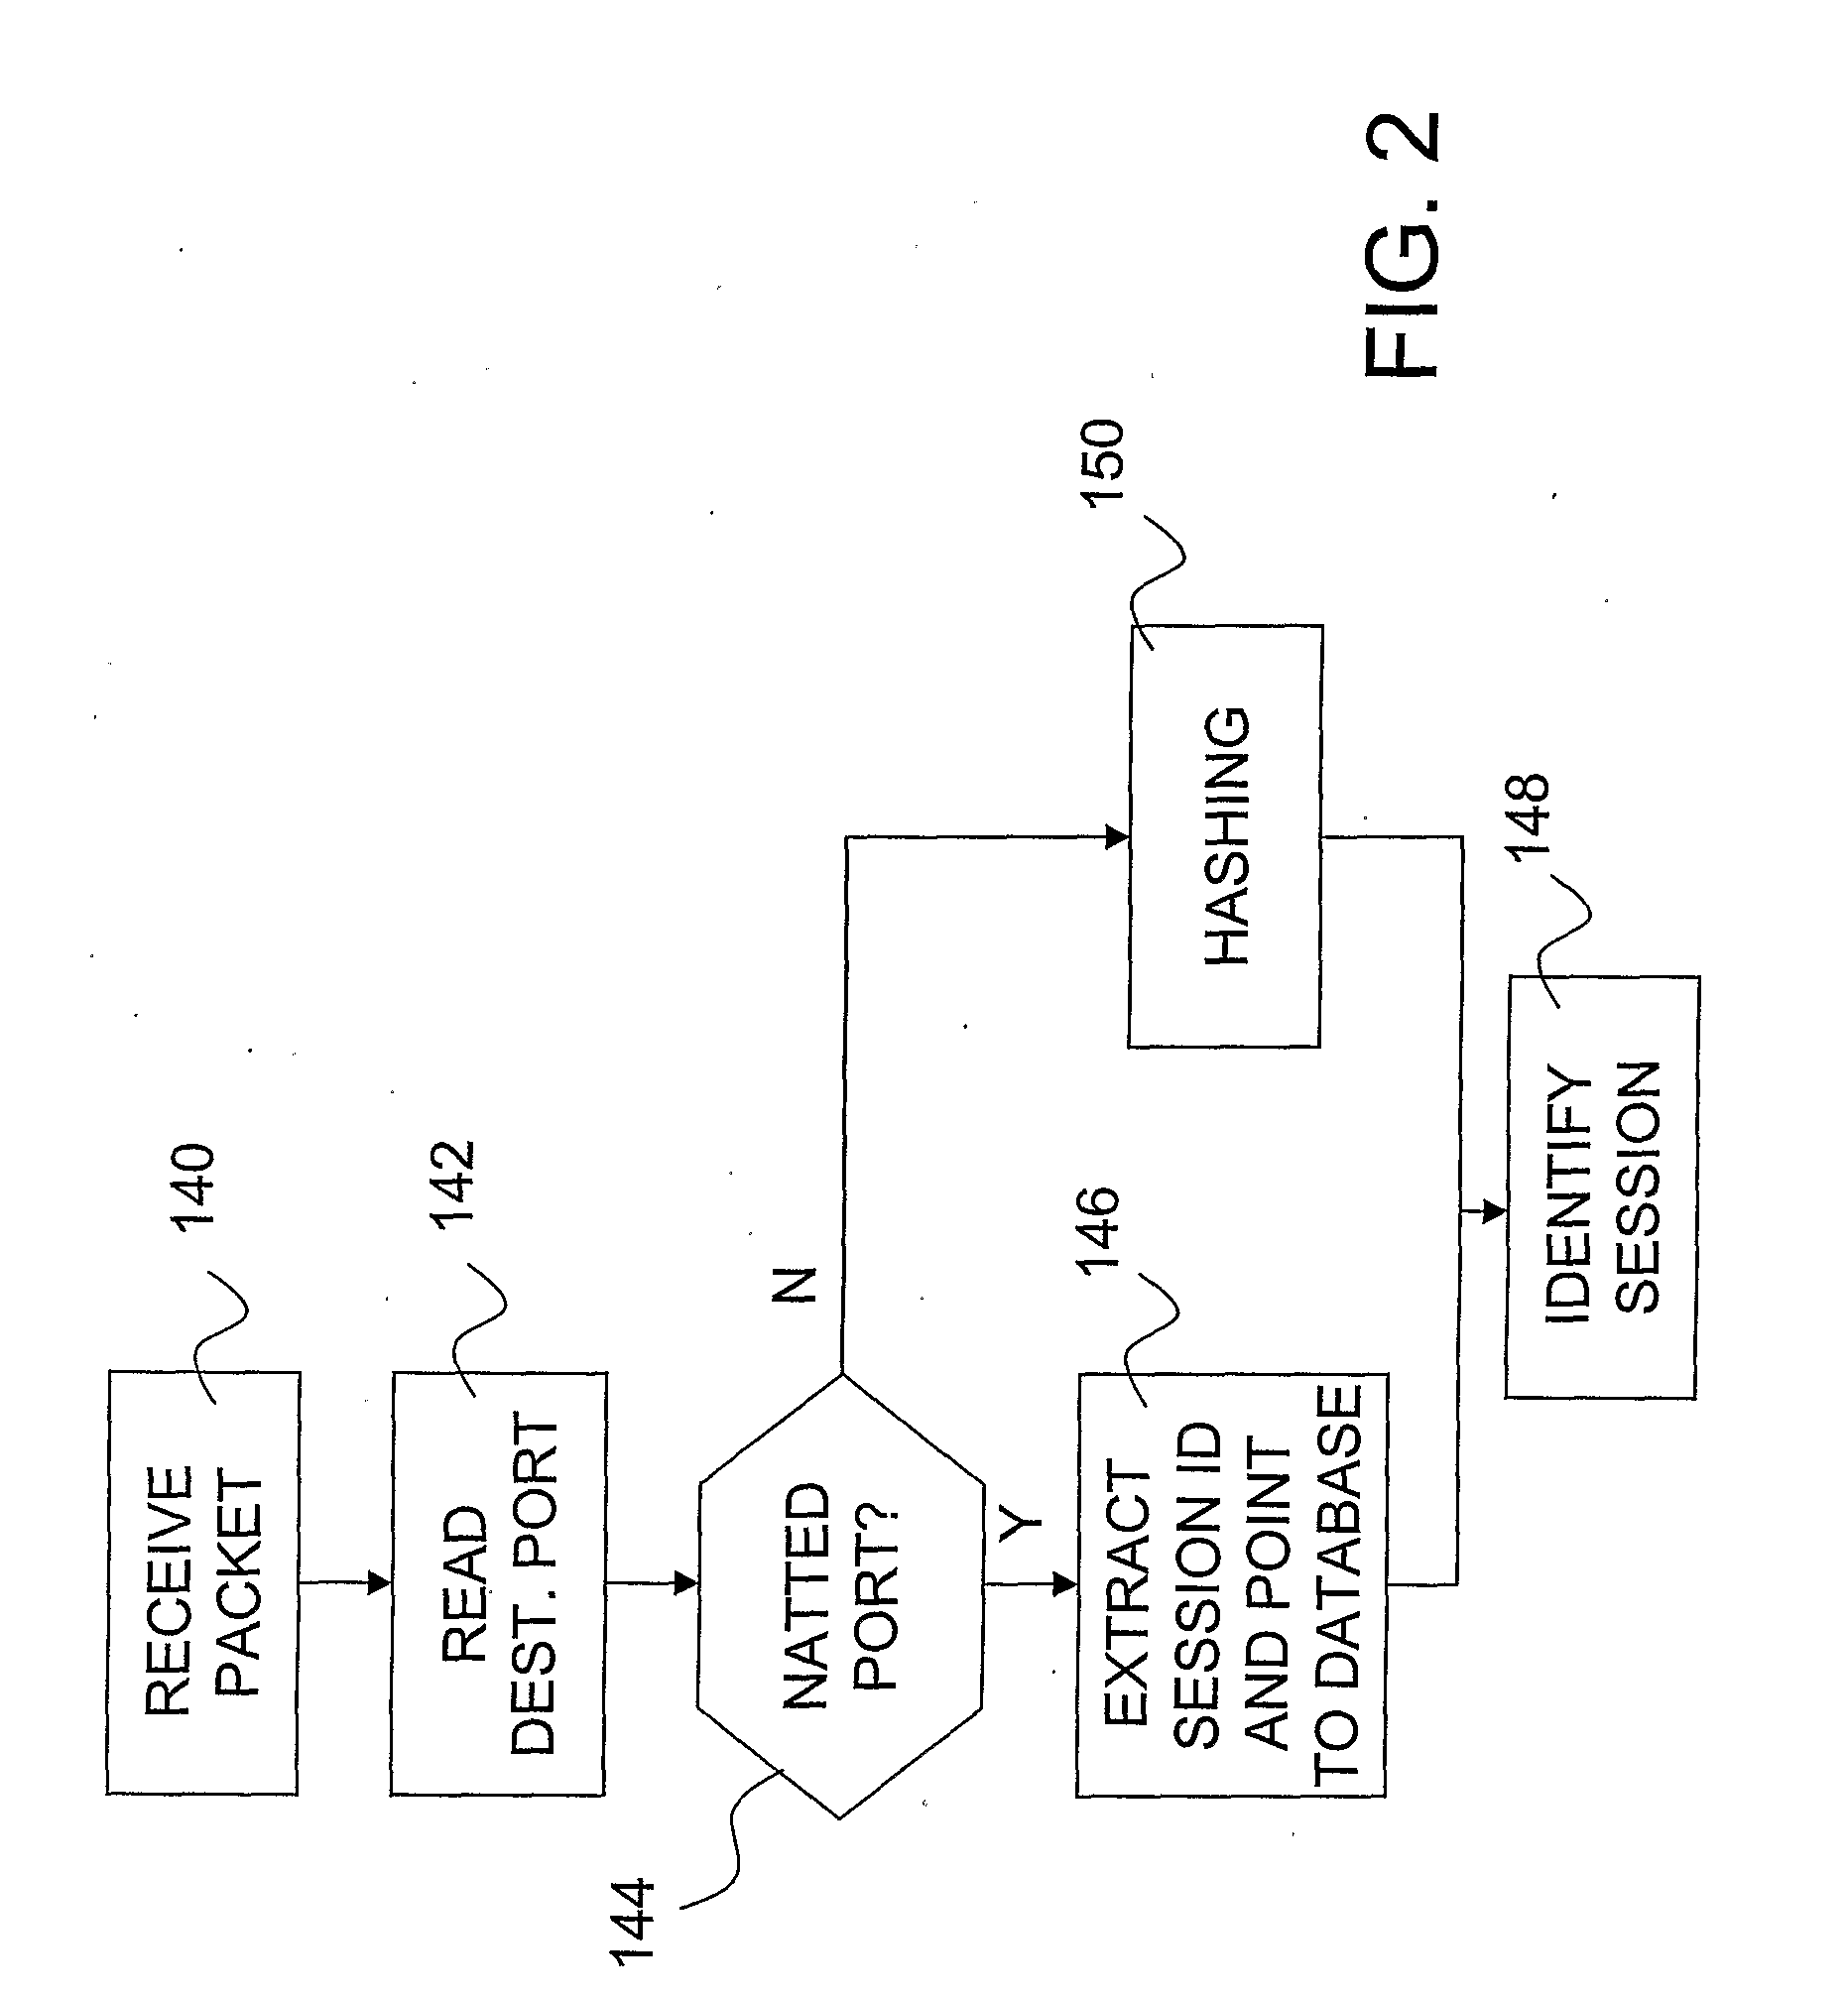 Method and System for Secure Communication Between a Public Network and a Local Network